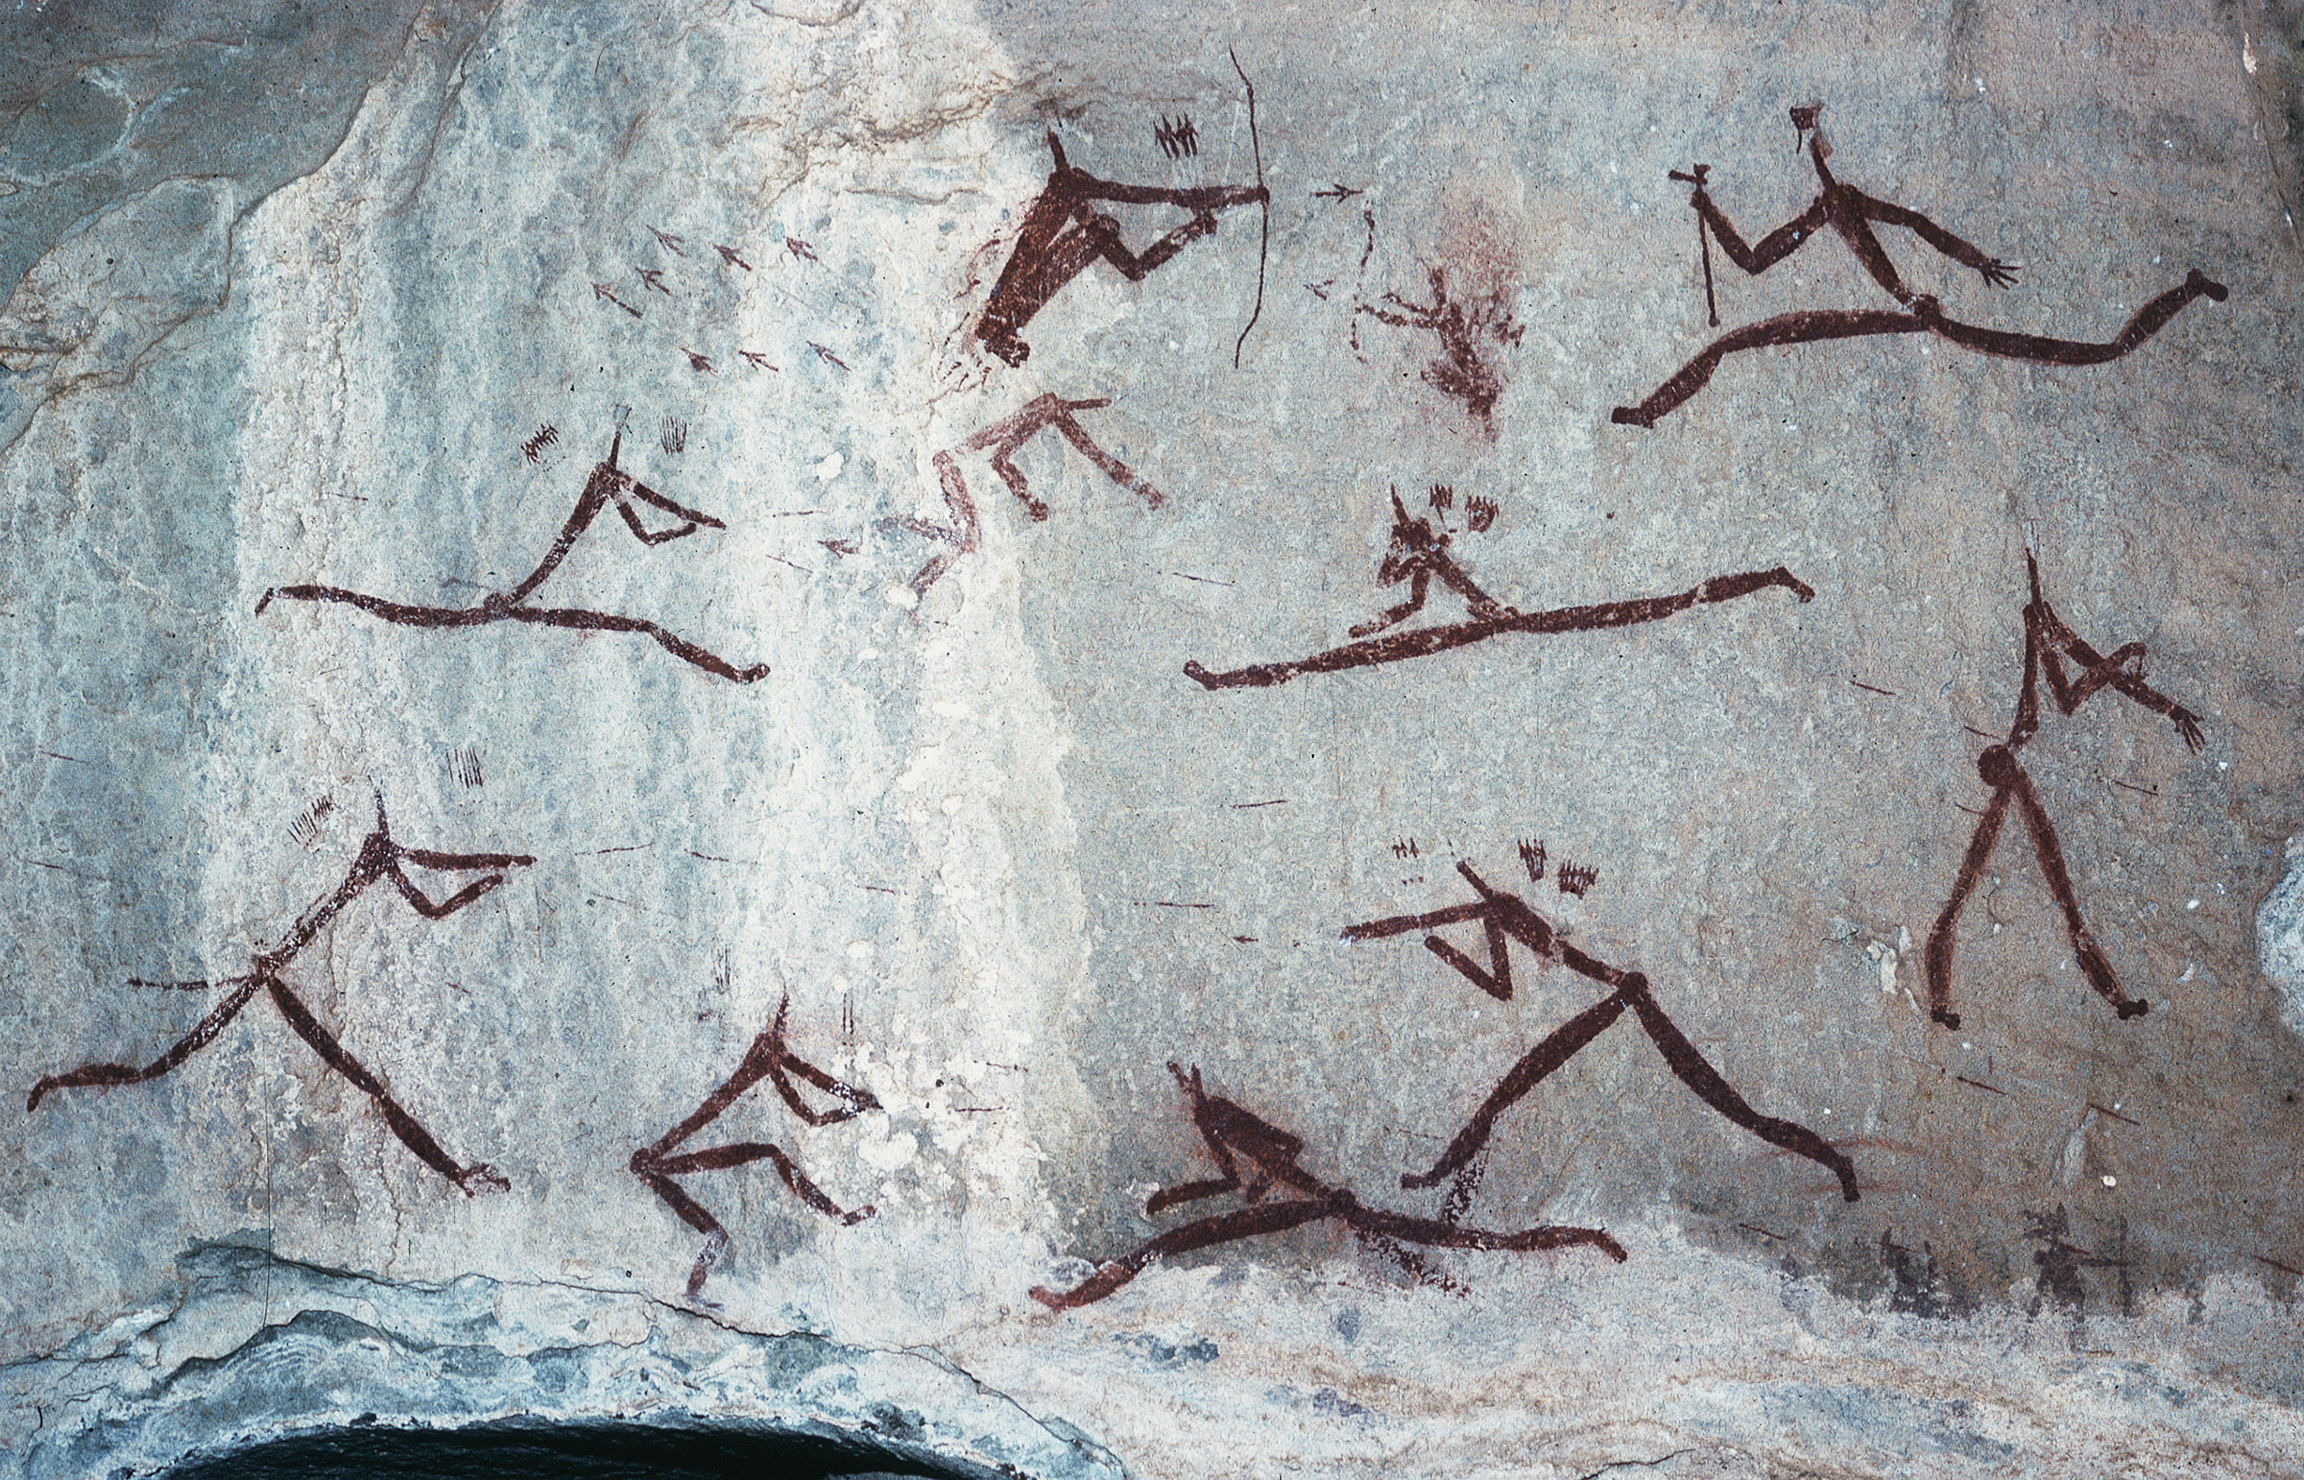 Central part of the Battle Cave fight scene, Injasuthi, February 1980